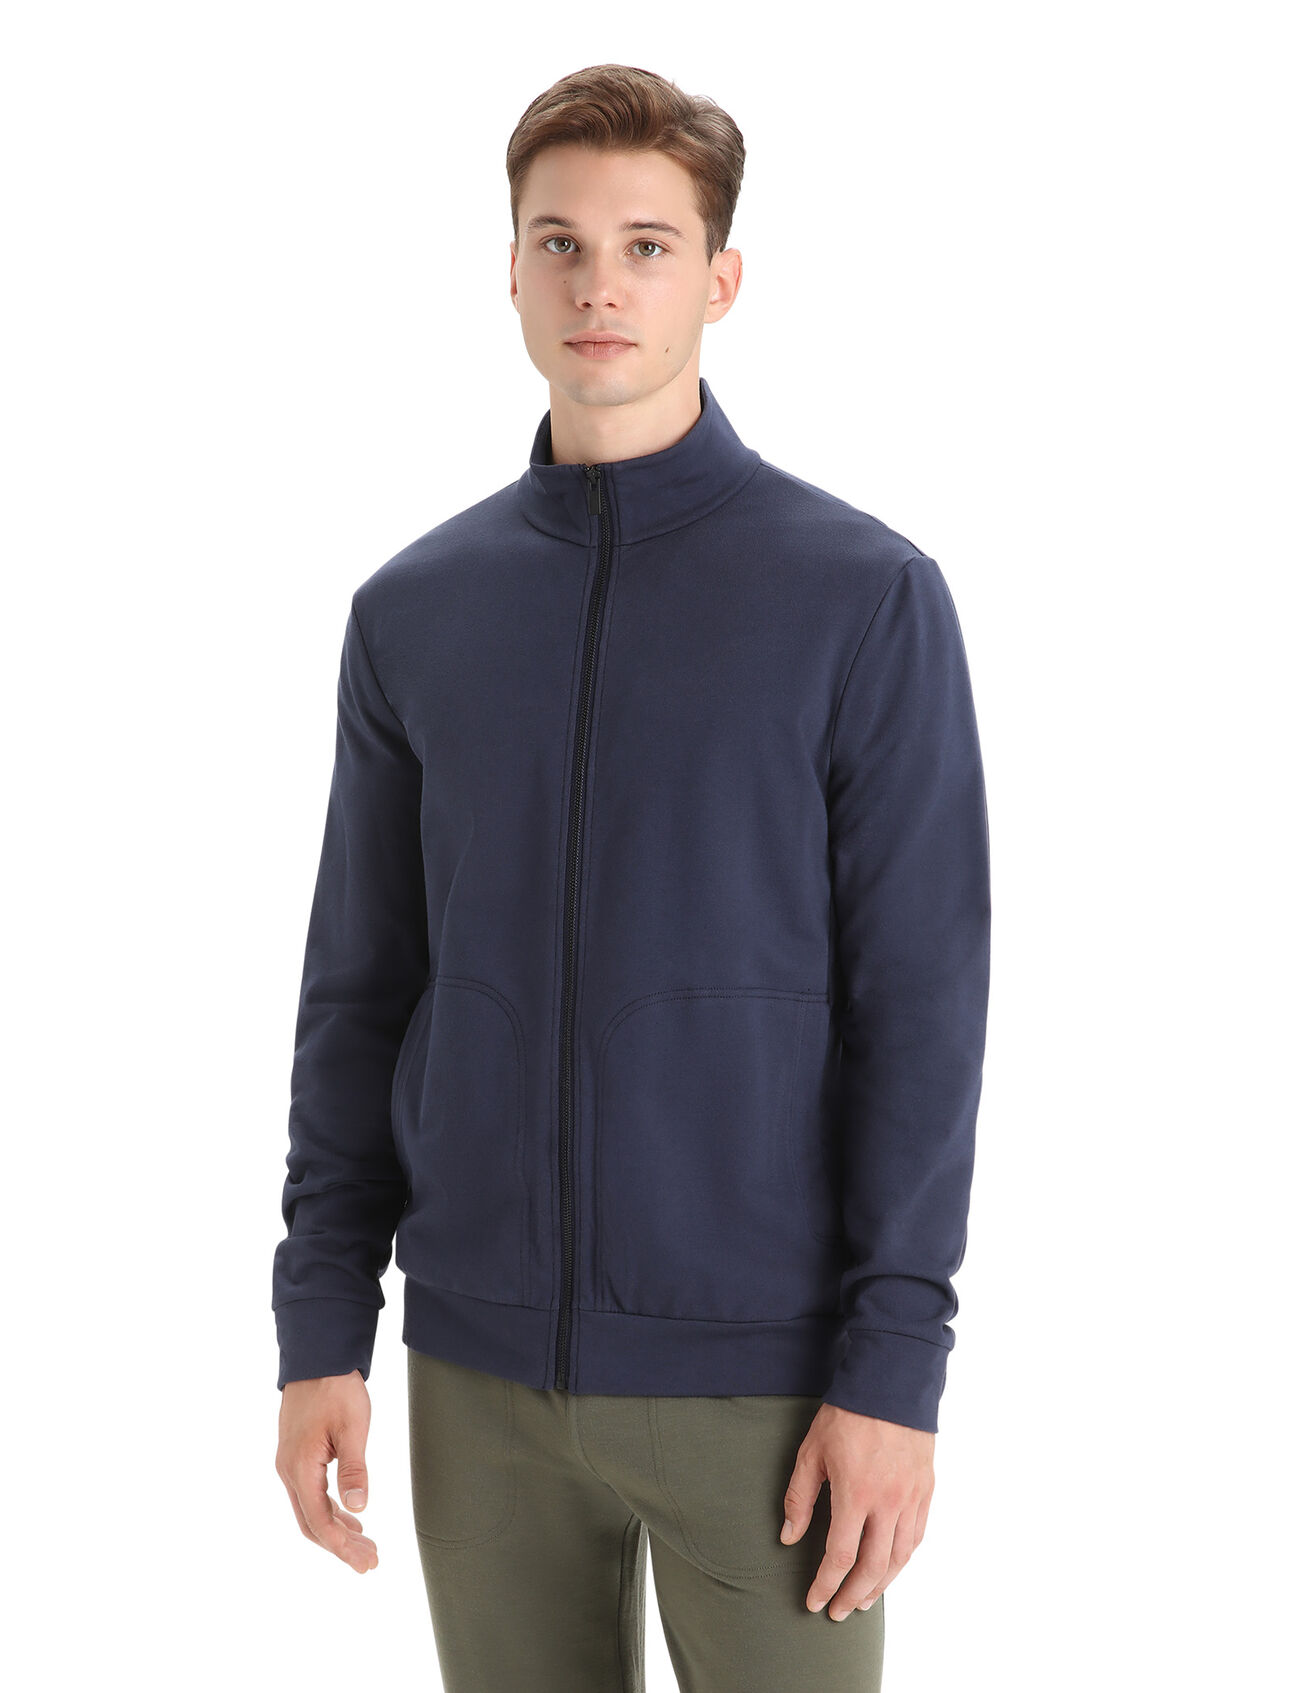 Mens Merino Cotton Central Classic Long Sleeve Zip Sweatshirt A clean, classic and comfortable everyday sweatshirt that blends natural merino wool with organically grown cotton, the Central Classic Long Sleeve Zip is durable, breathable and incredibly versatile.  